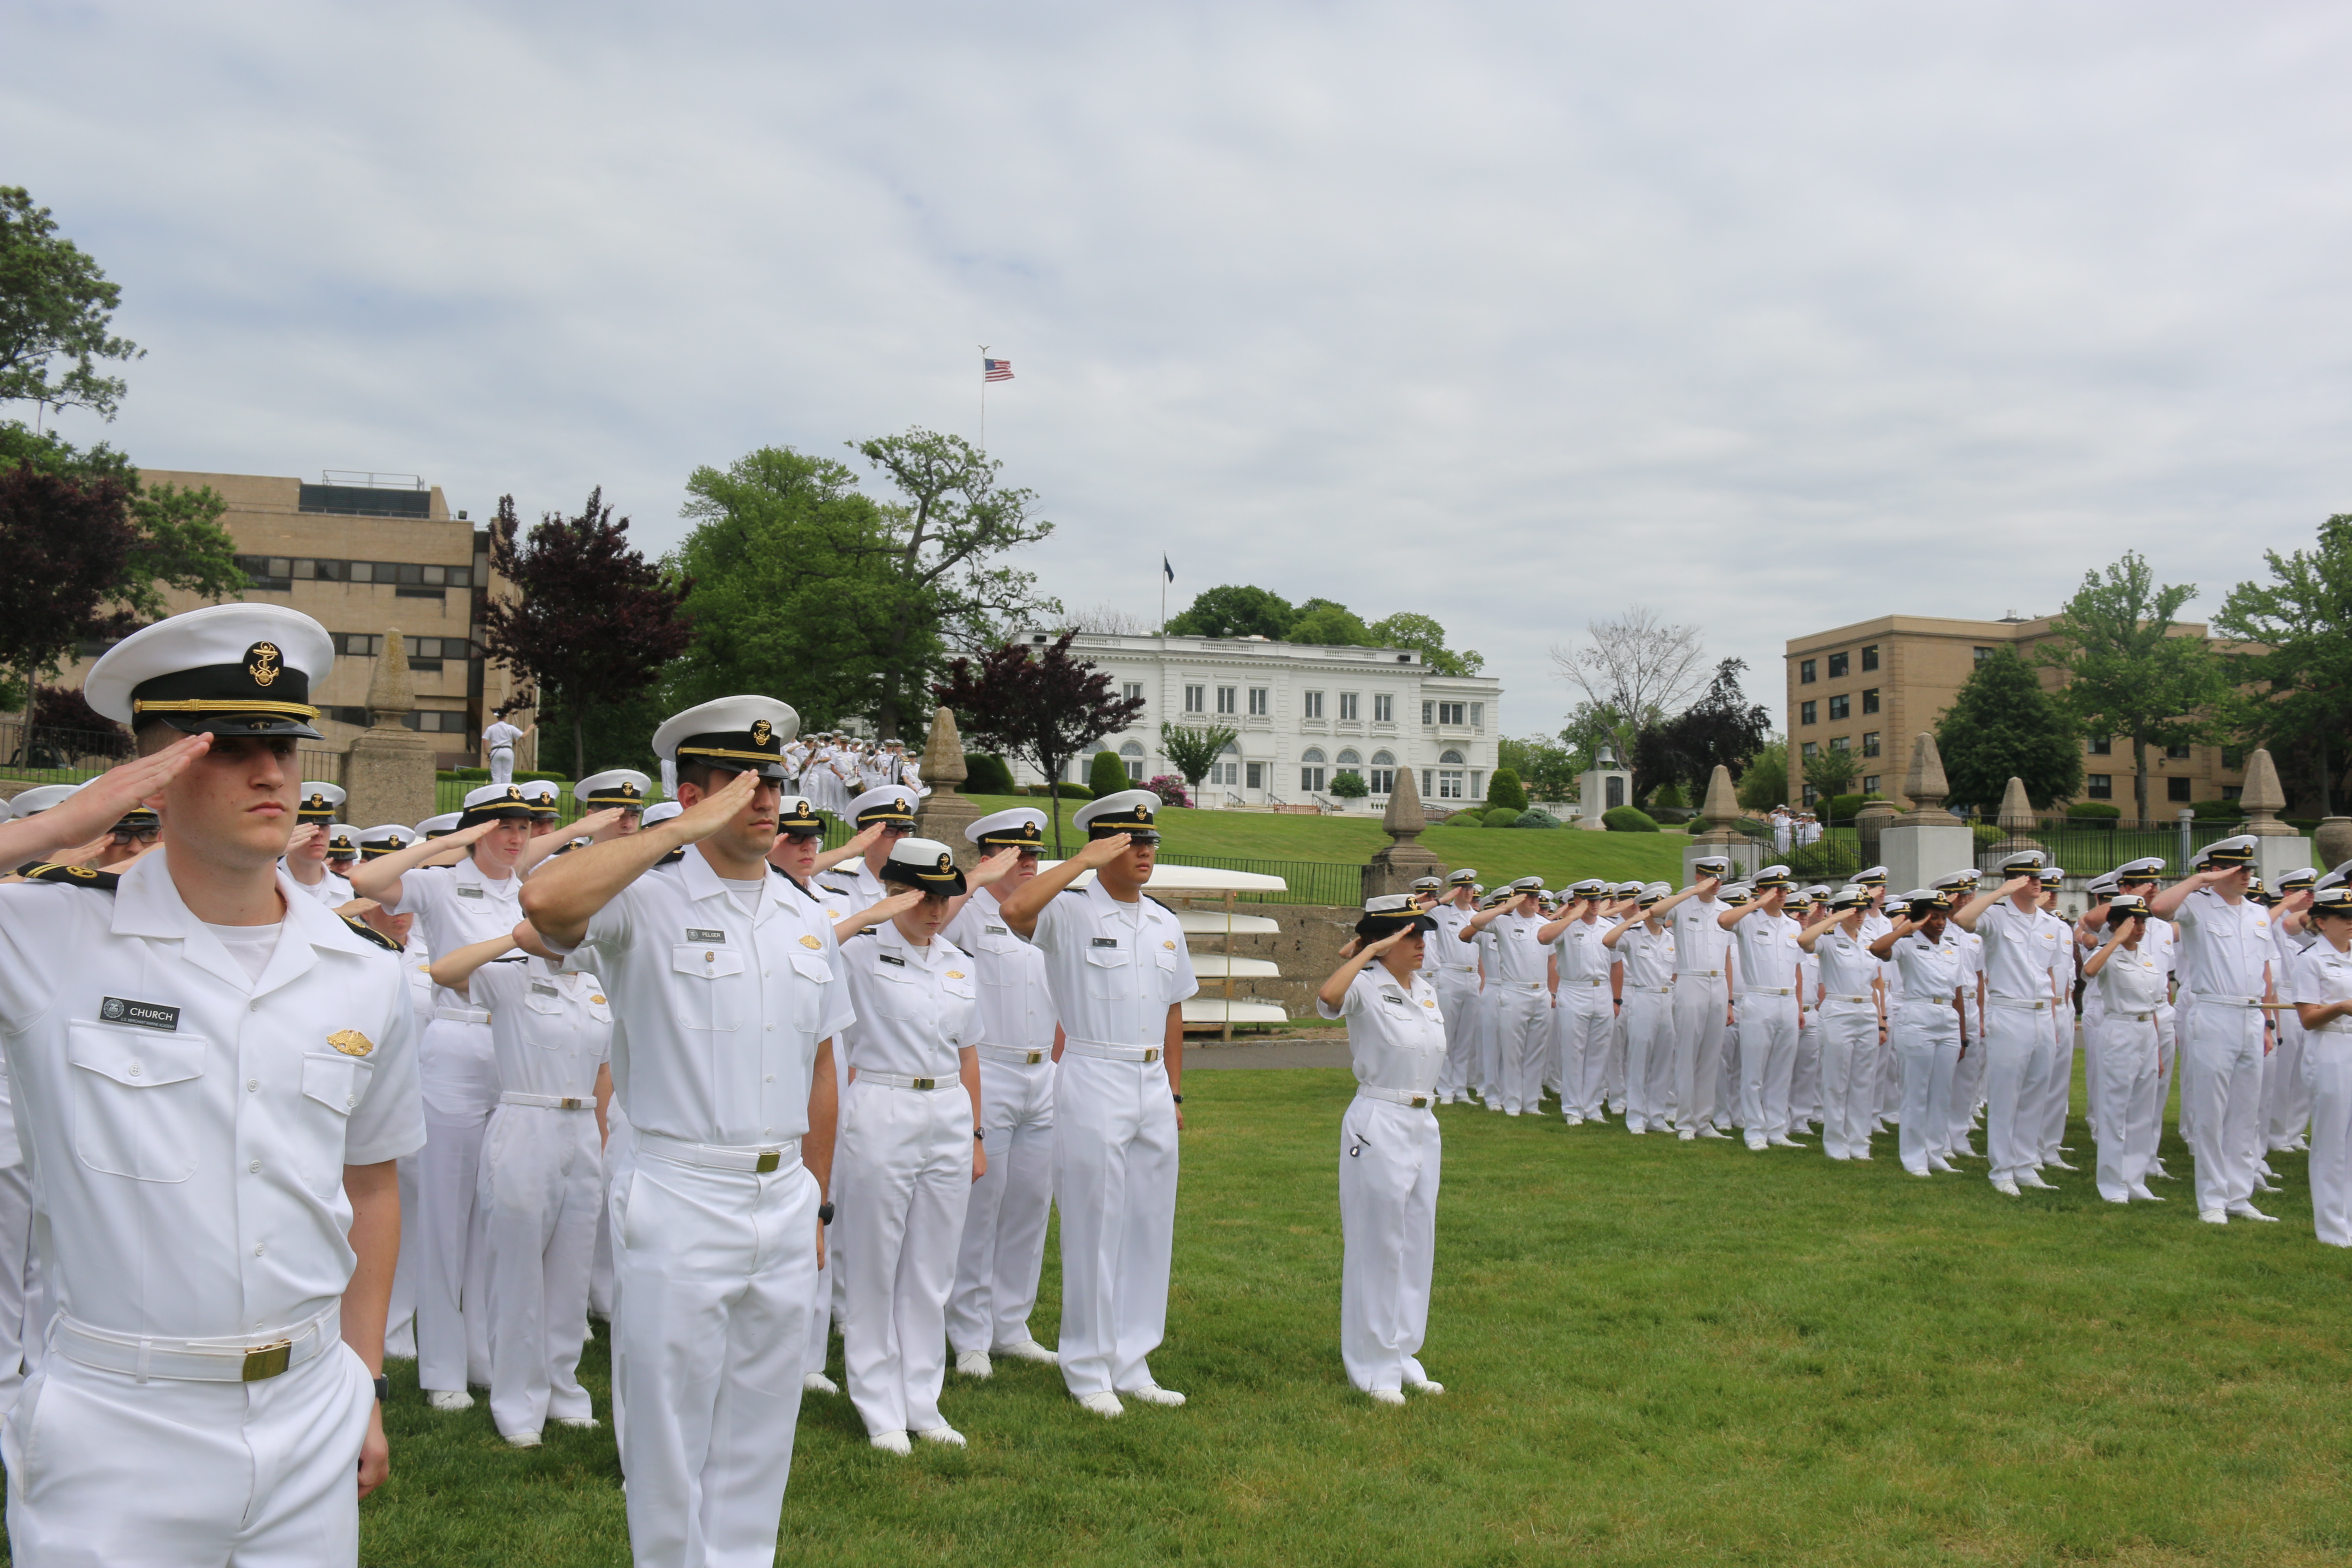 The Regiment of Midshipmen salute the colors at the USS Zephyr Welcome Ceremony